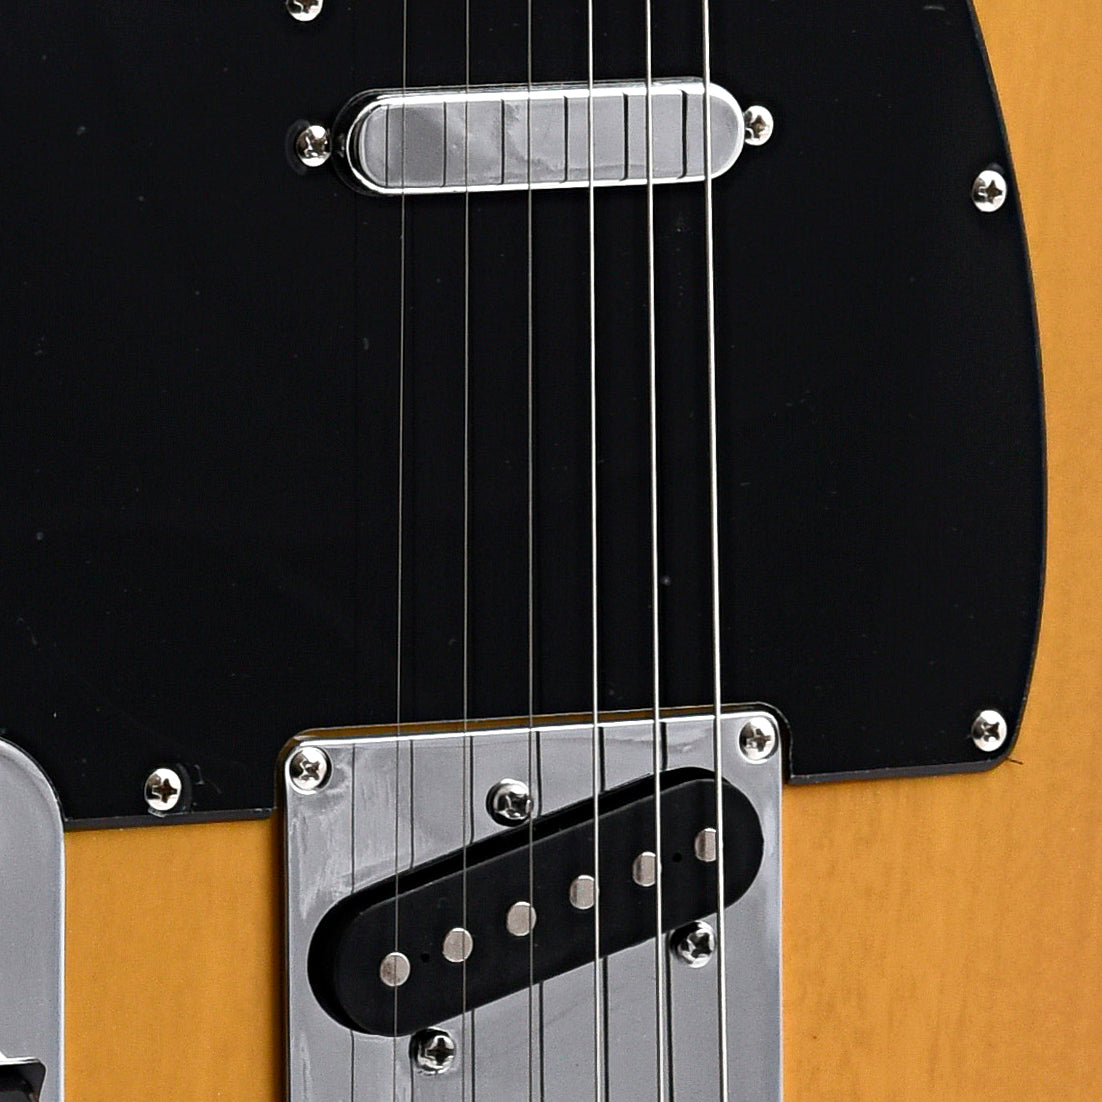 pickups of Squier Affinity Telecaster, Left Handed